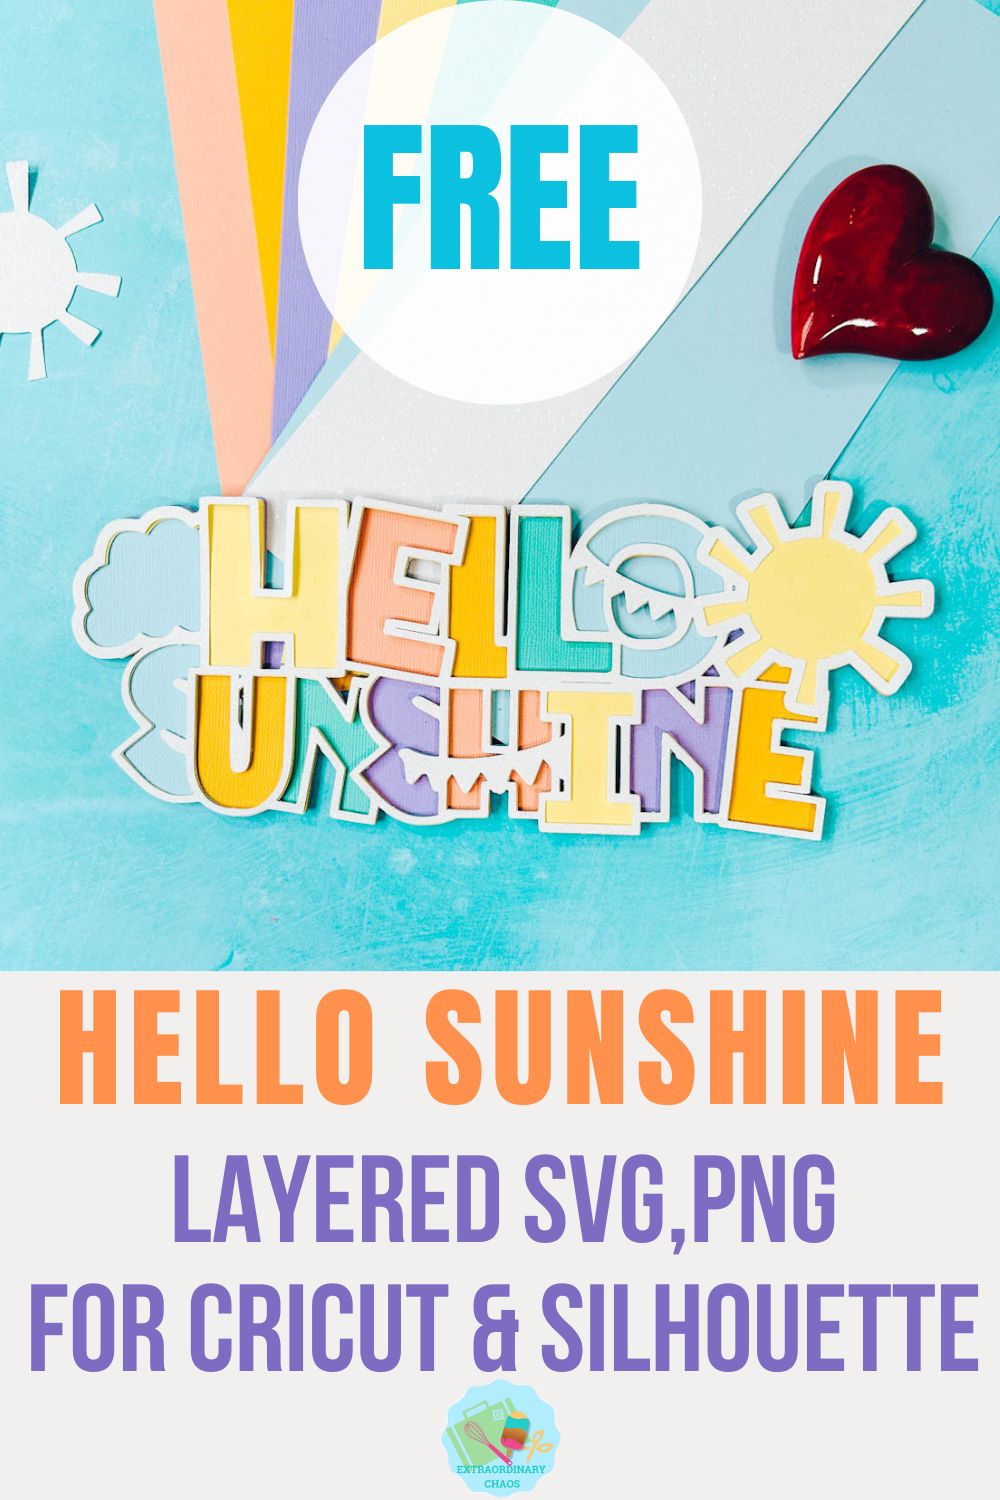 Hello Sunshine Layered SVG,PNG For Cricut & Silhouette